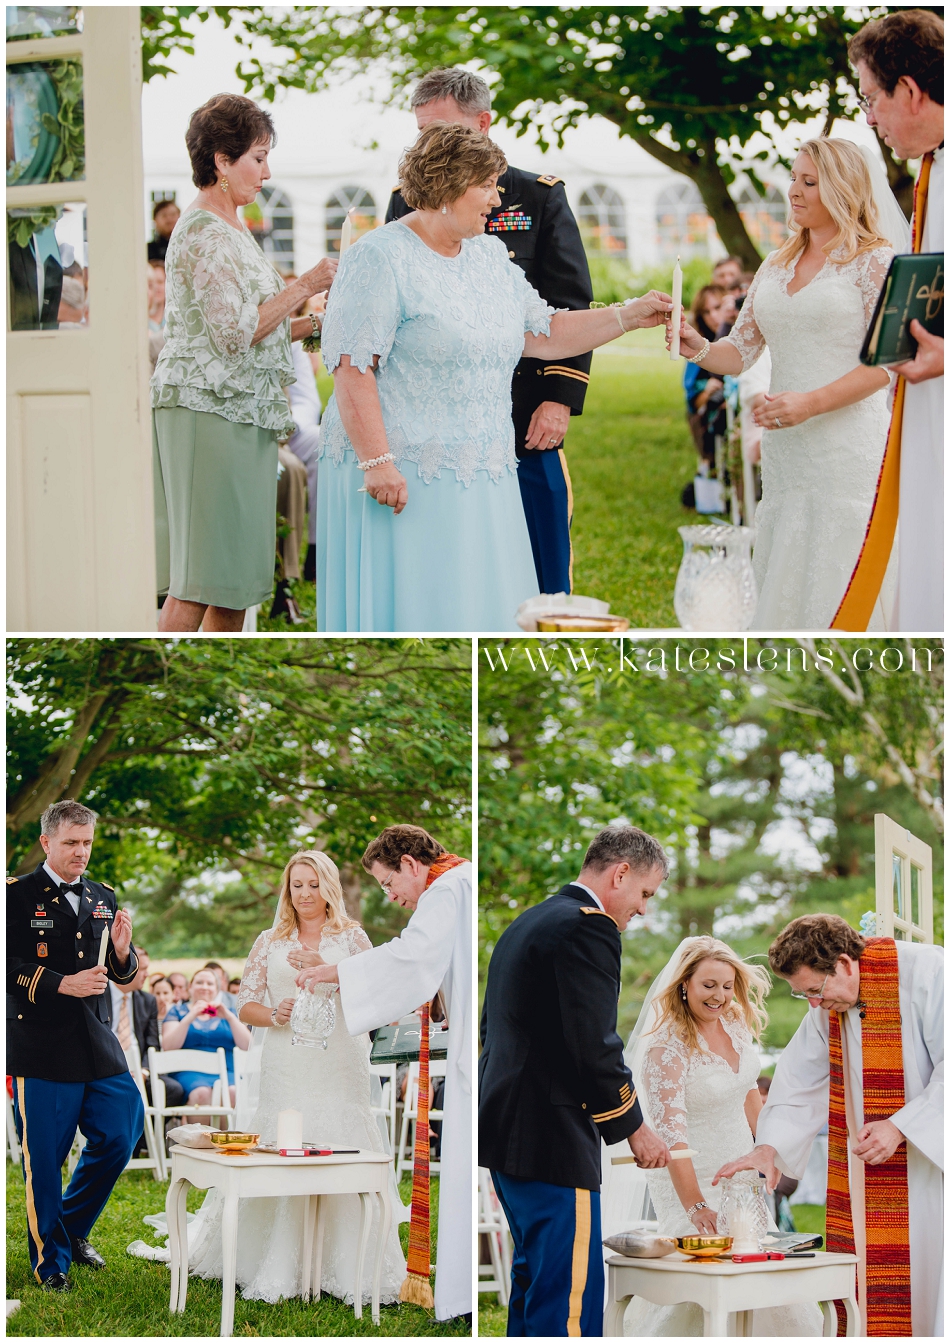 Stone_Manor_Country_Club_Wedding_Summer_Photography_Middletown_Maryland_Destination_Kates_Lens_0093